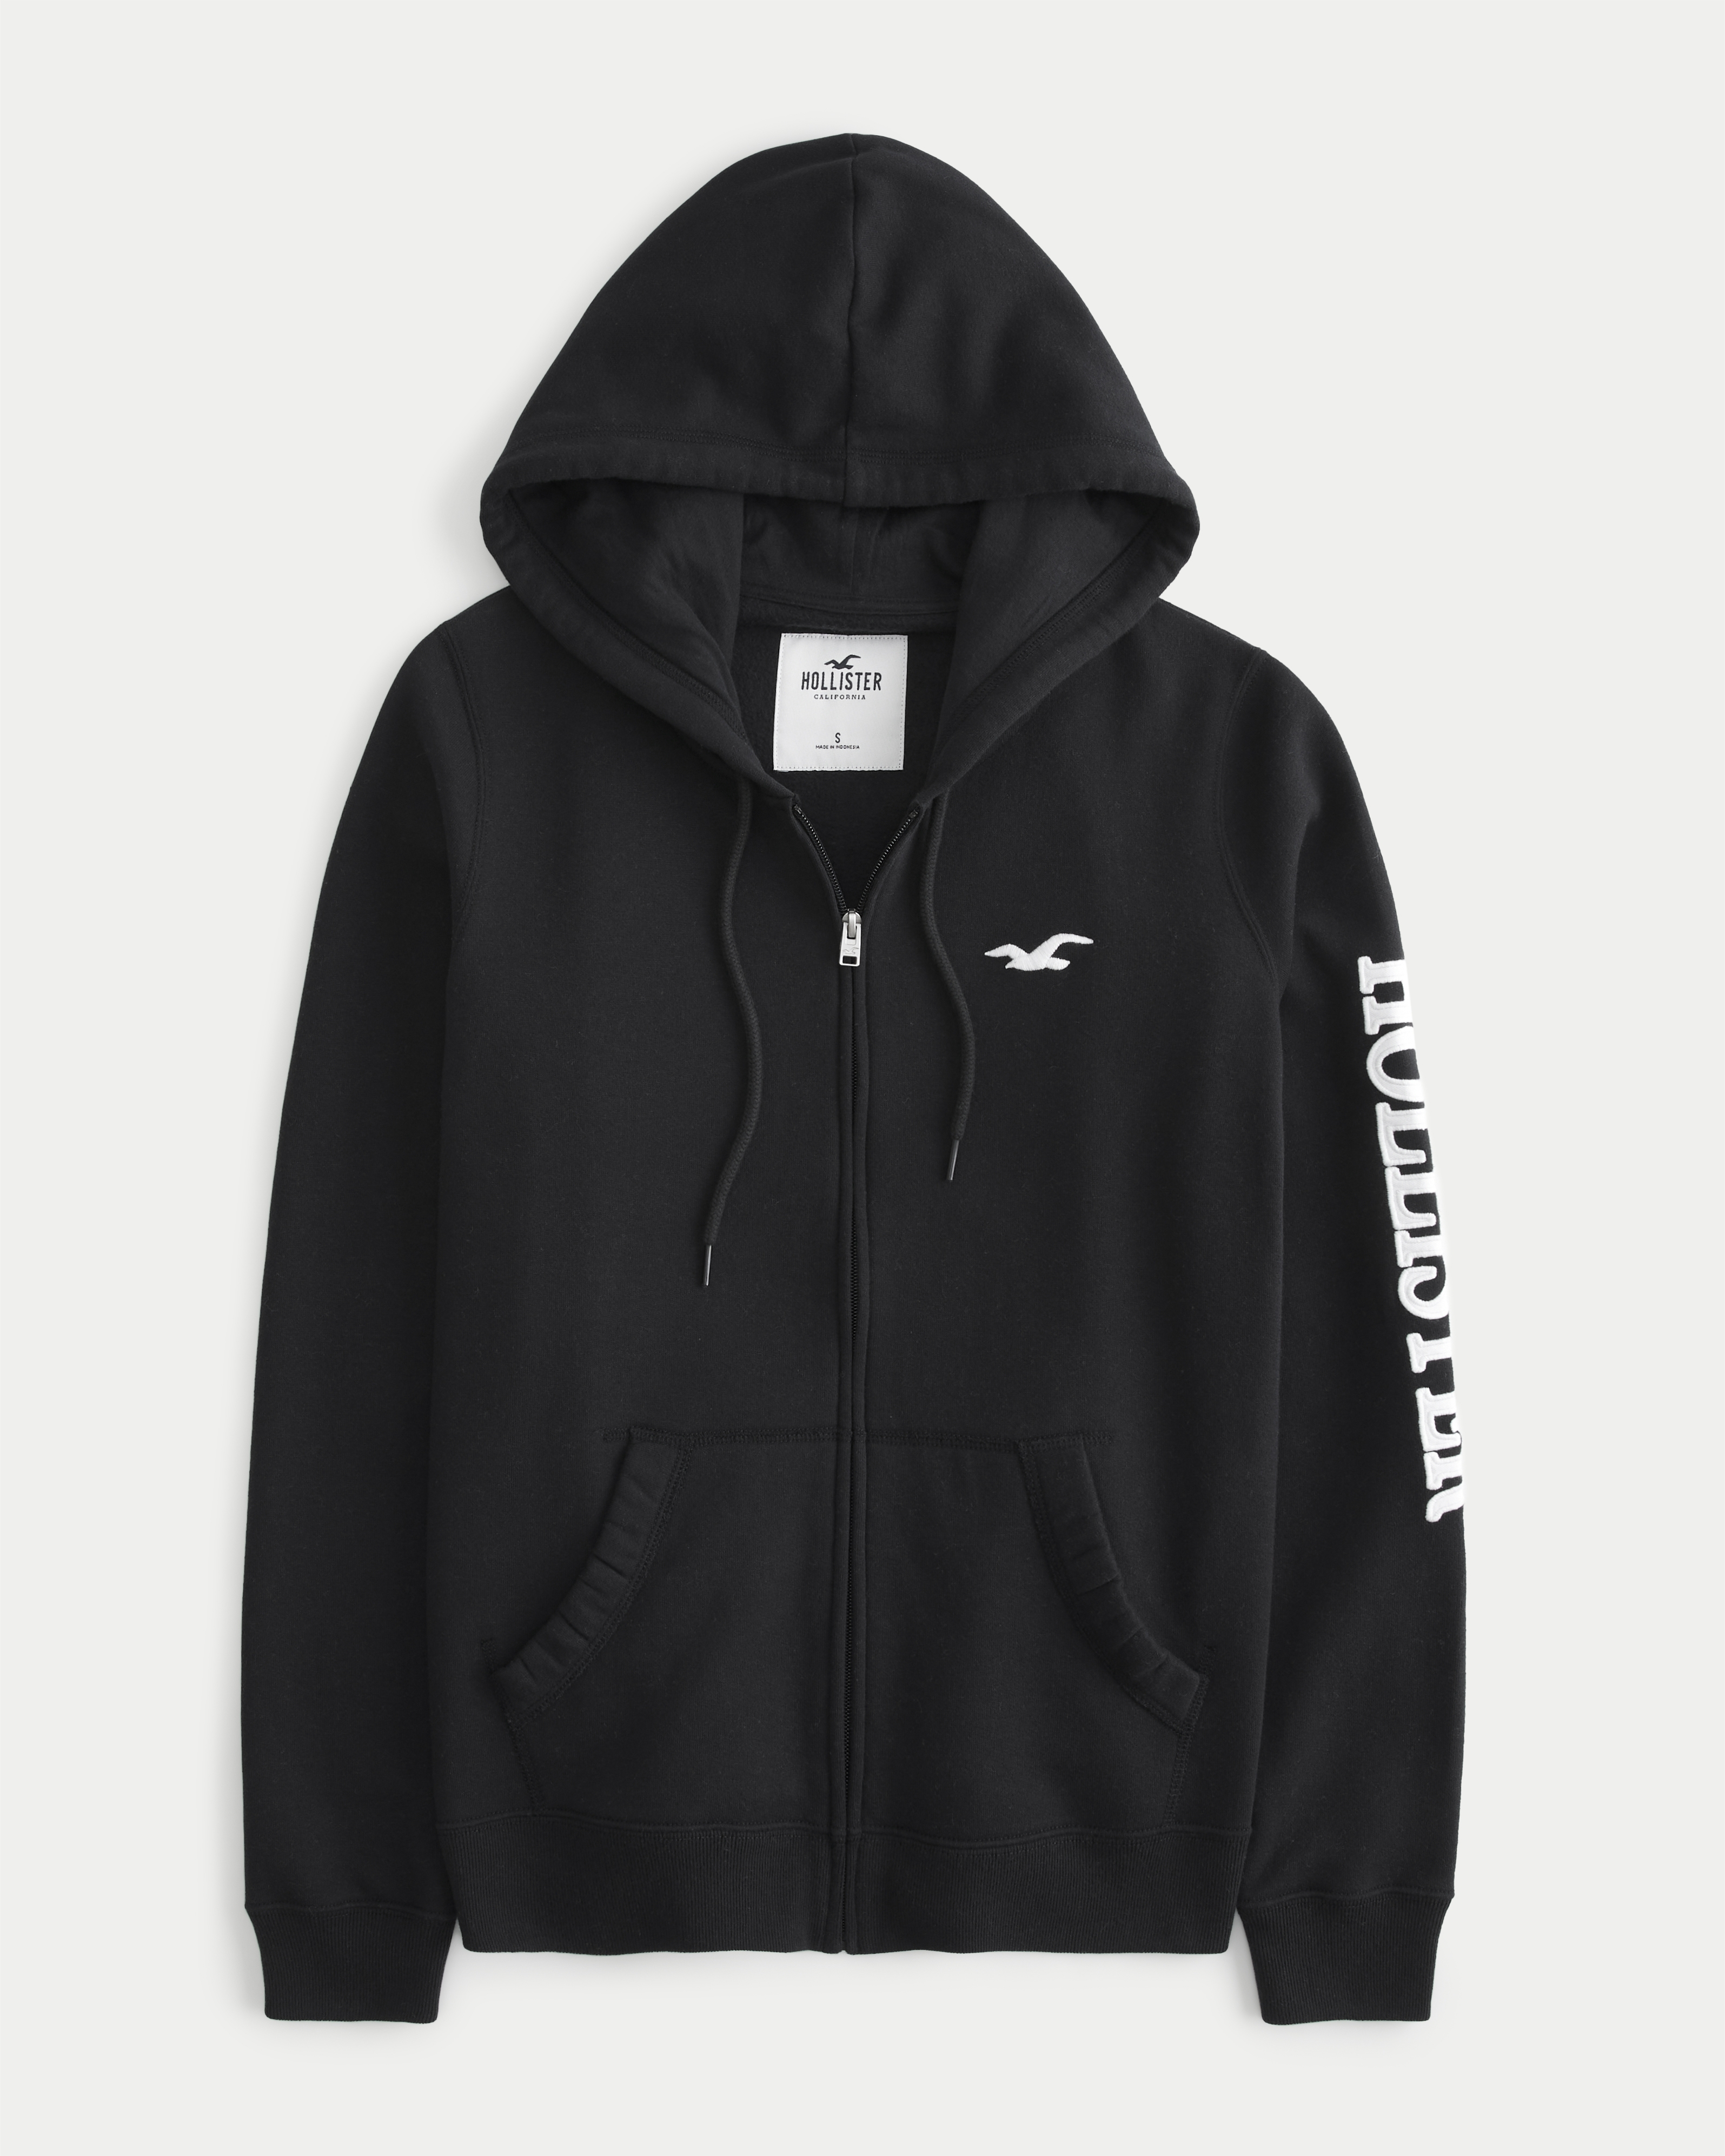 Easy Logo Graphic Hoodie